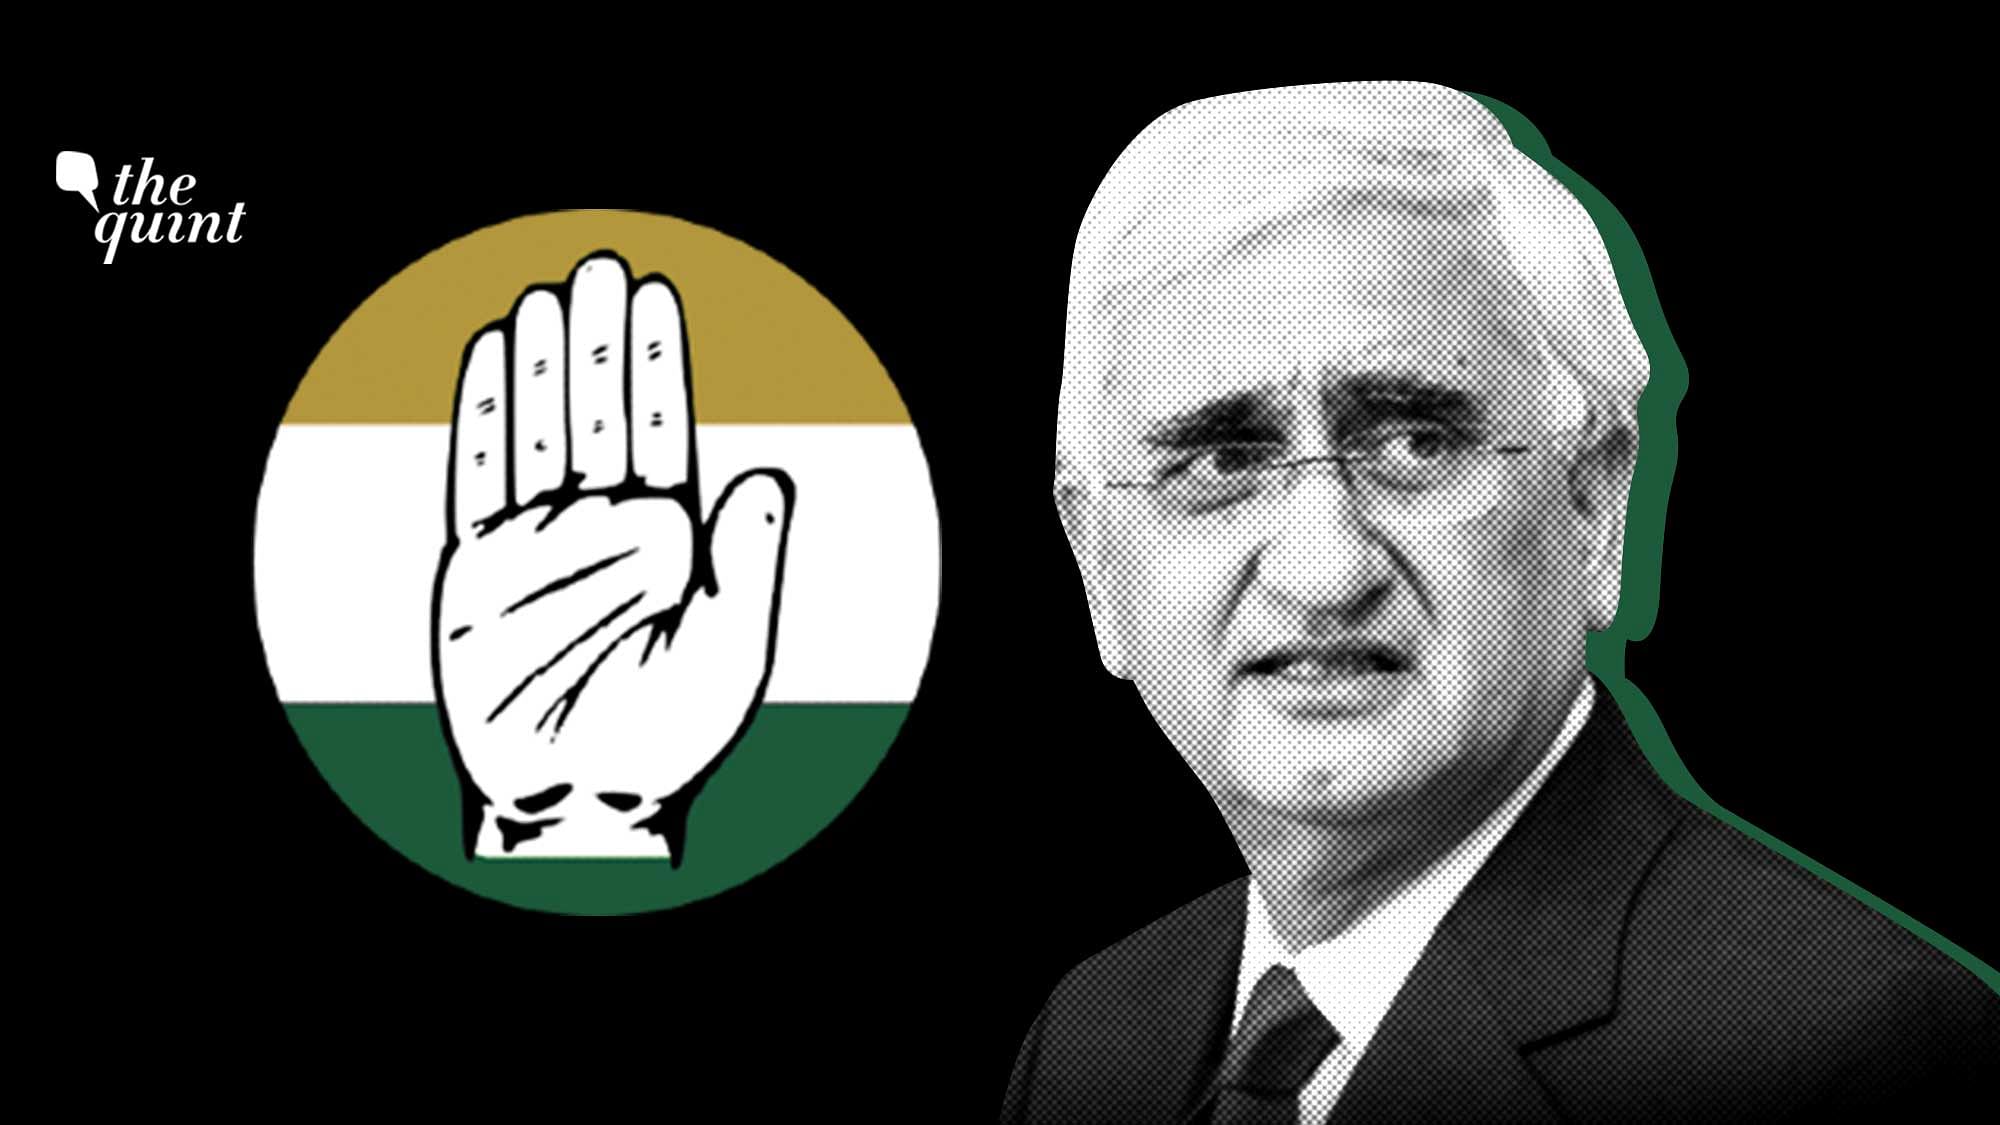 Senior Congress member and lawyer Salman Khurshid writes about the path ahead for the party and the importance of returning to its core ideology.